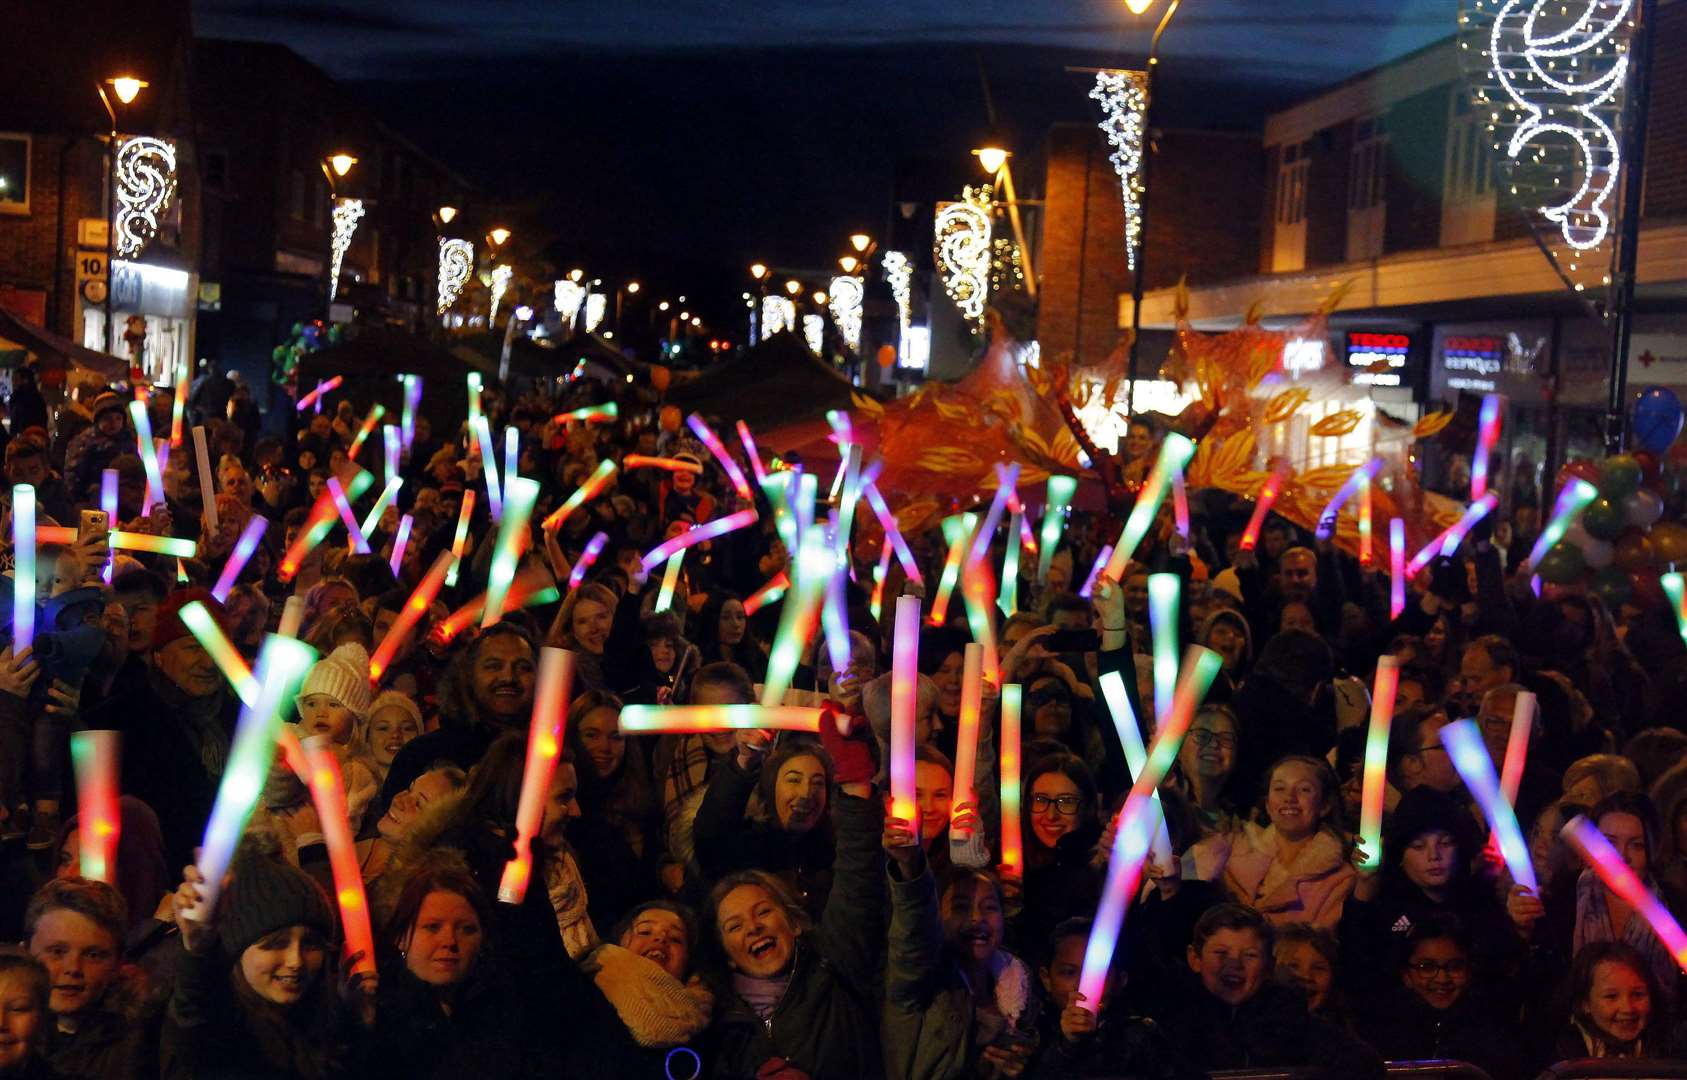 Grab a glowstick and head to the lights switch-on in Paddock Wood